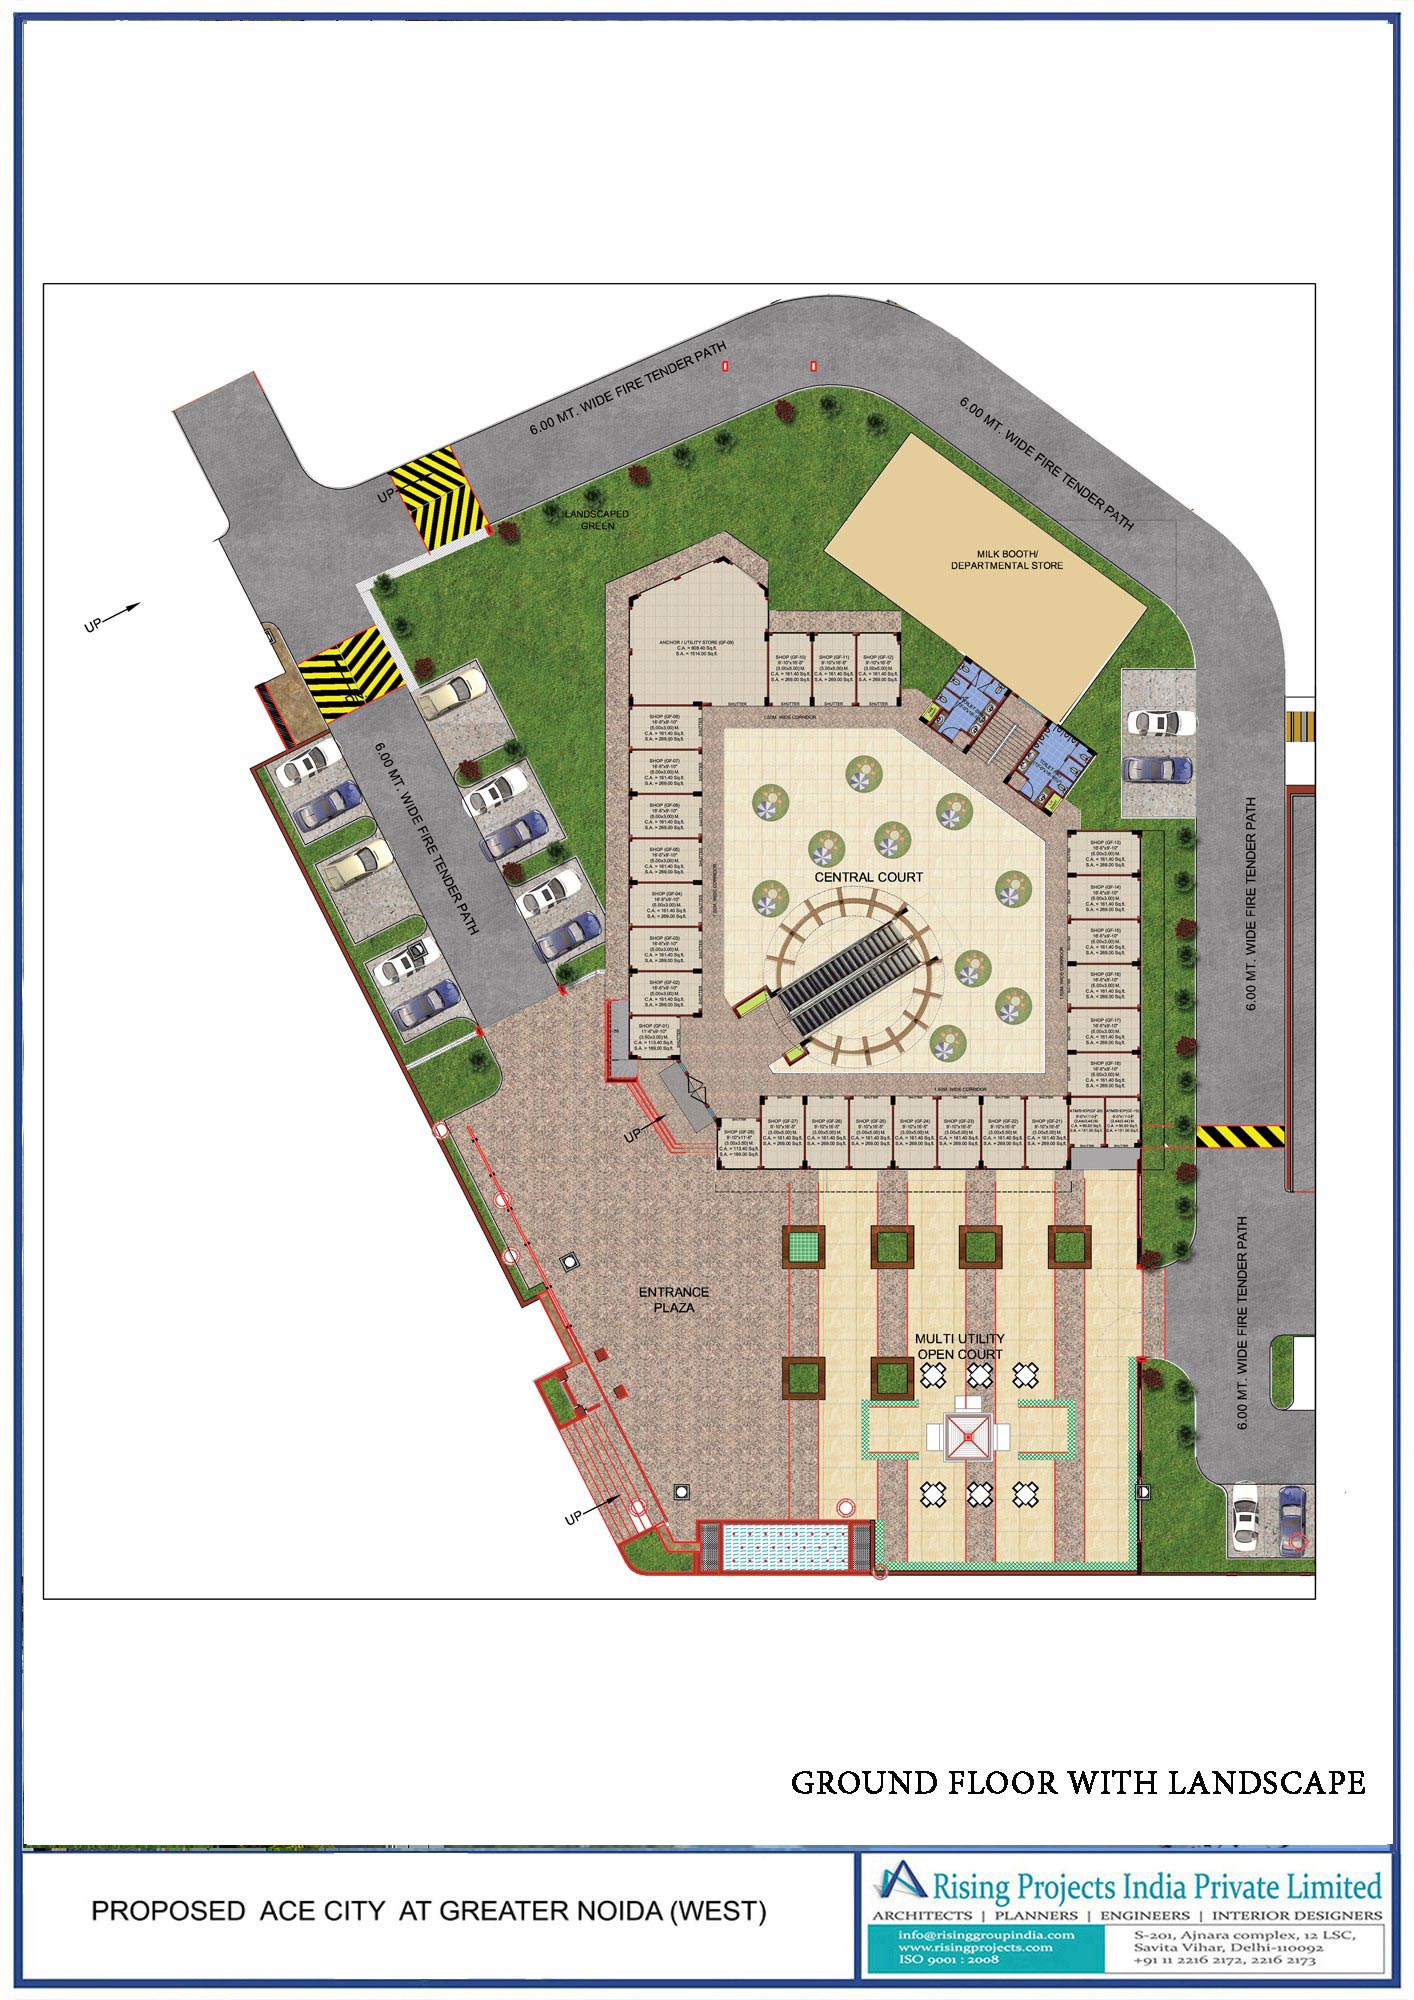 2/3 Bhk Residential Apartments site plan